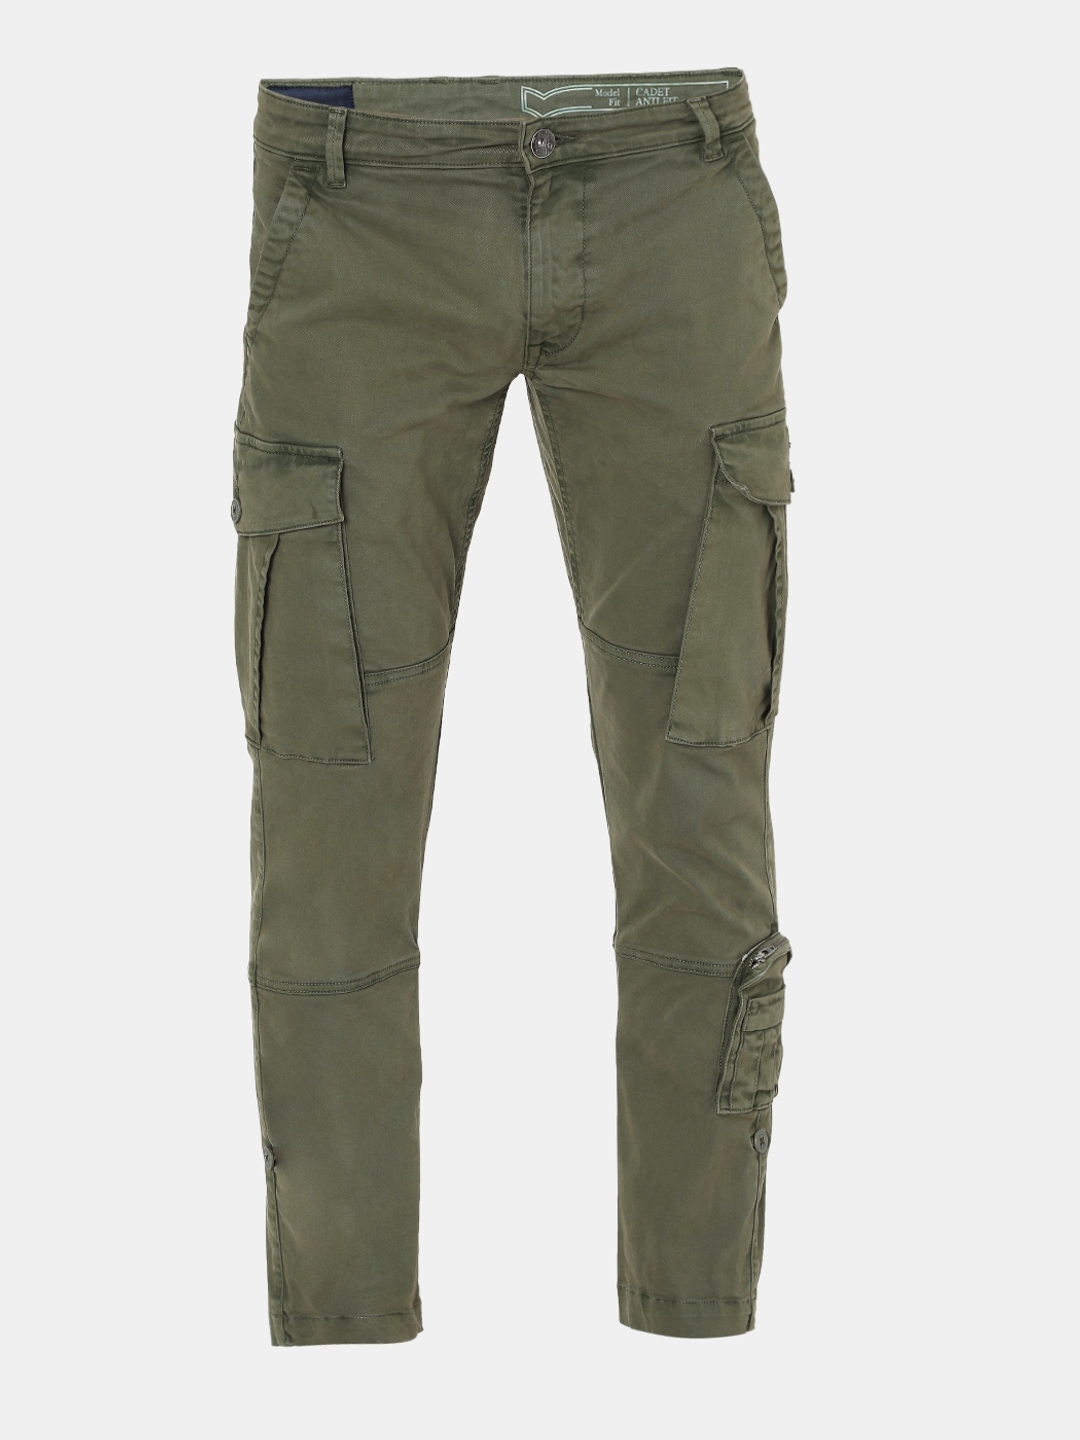 Buy Olive Trousers & Pants for Men by MAX Online | Ajio.com